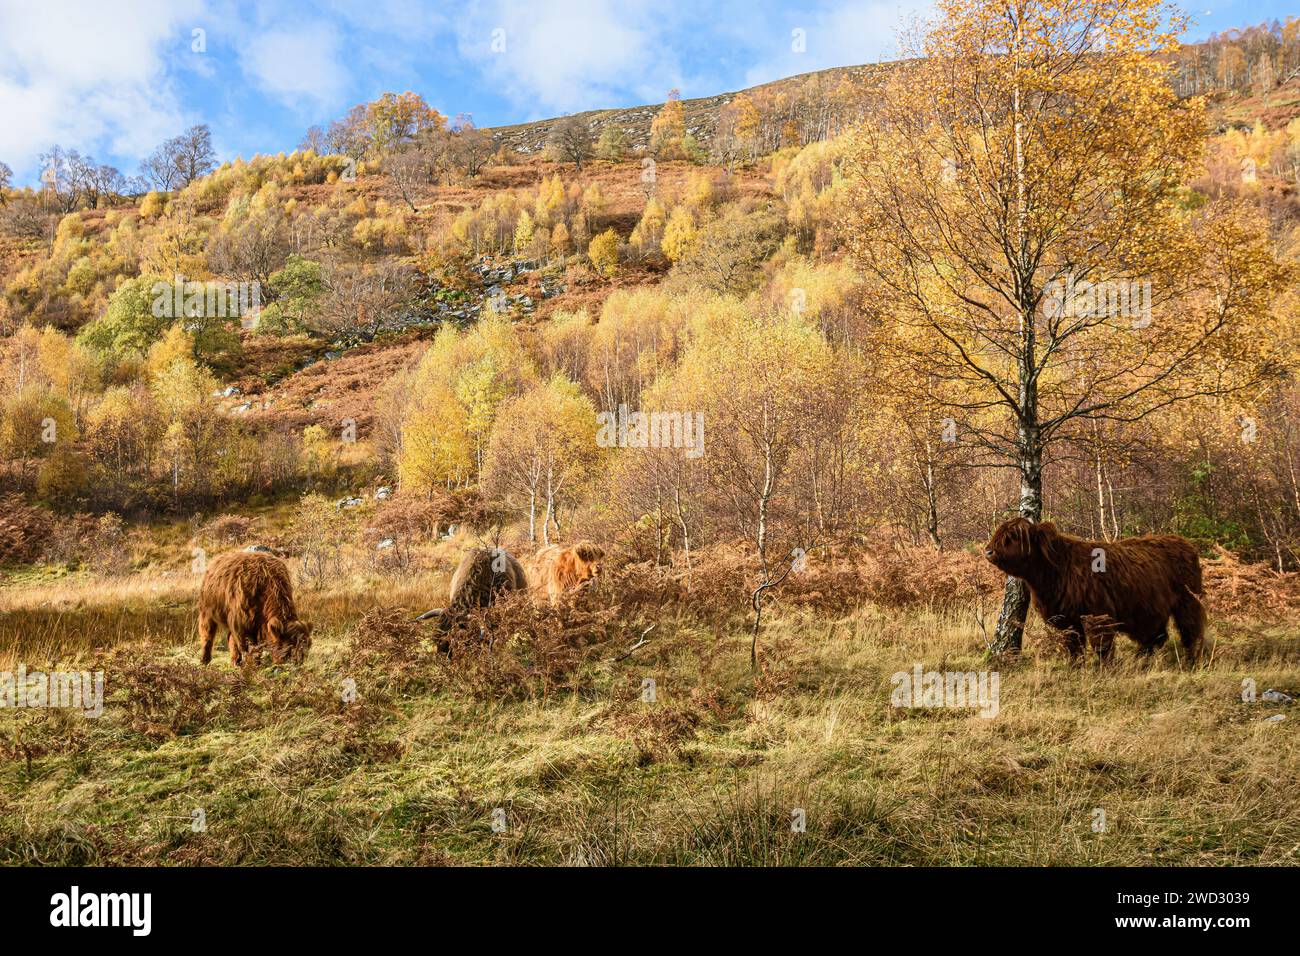 View along a rocky hillside wooded with Birch trees Betula, & four Highland cattle feeding at the base in bracken & grassland, all illuminated with su Stock Photo